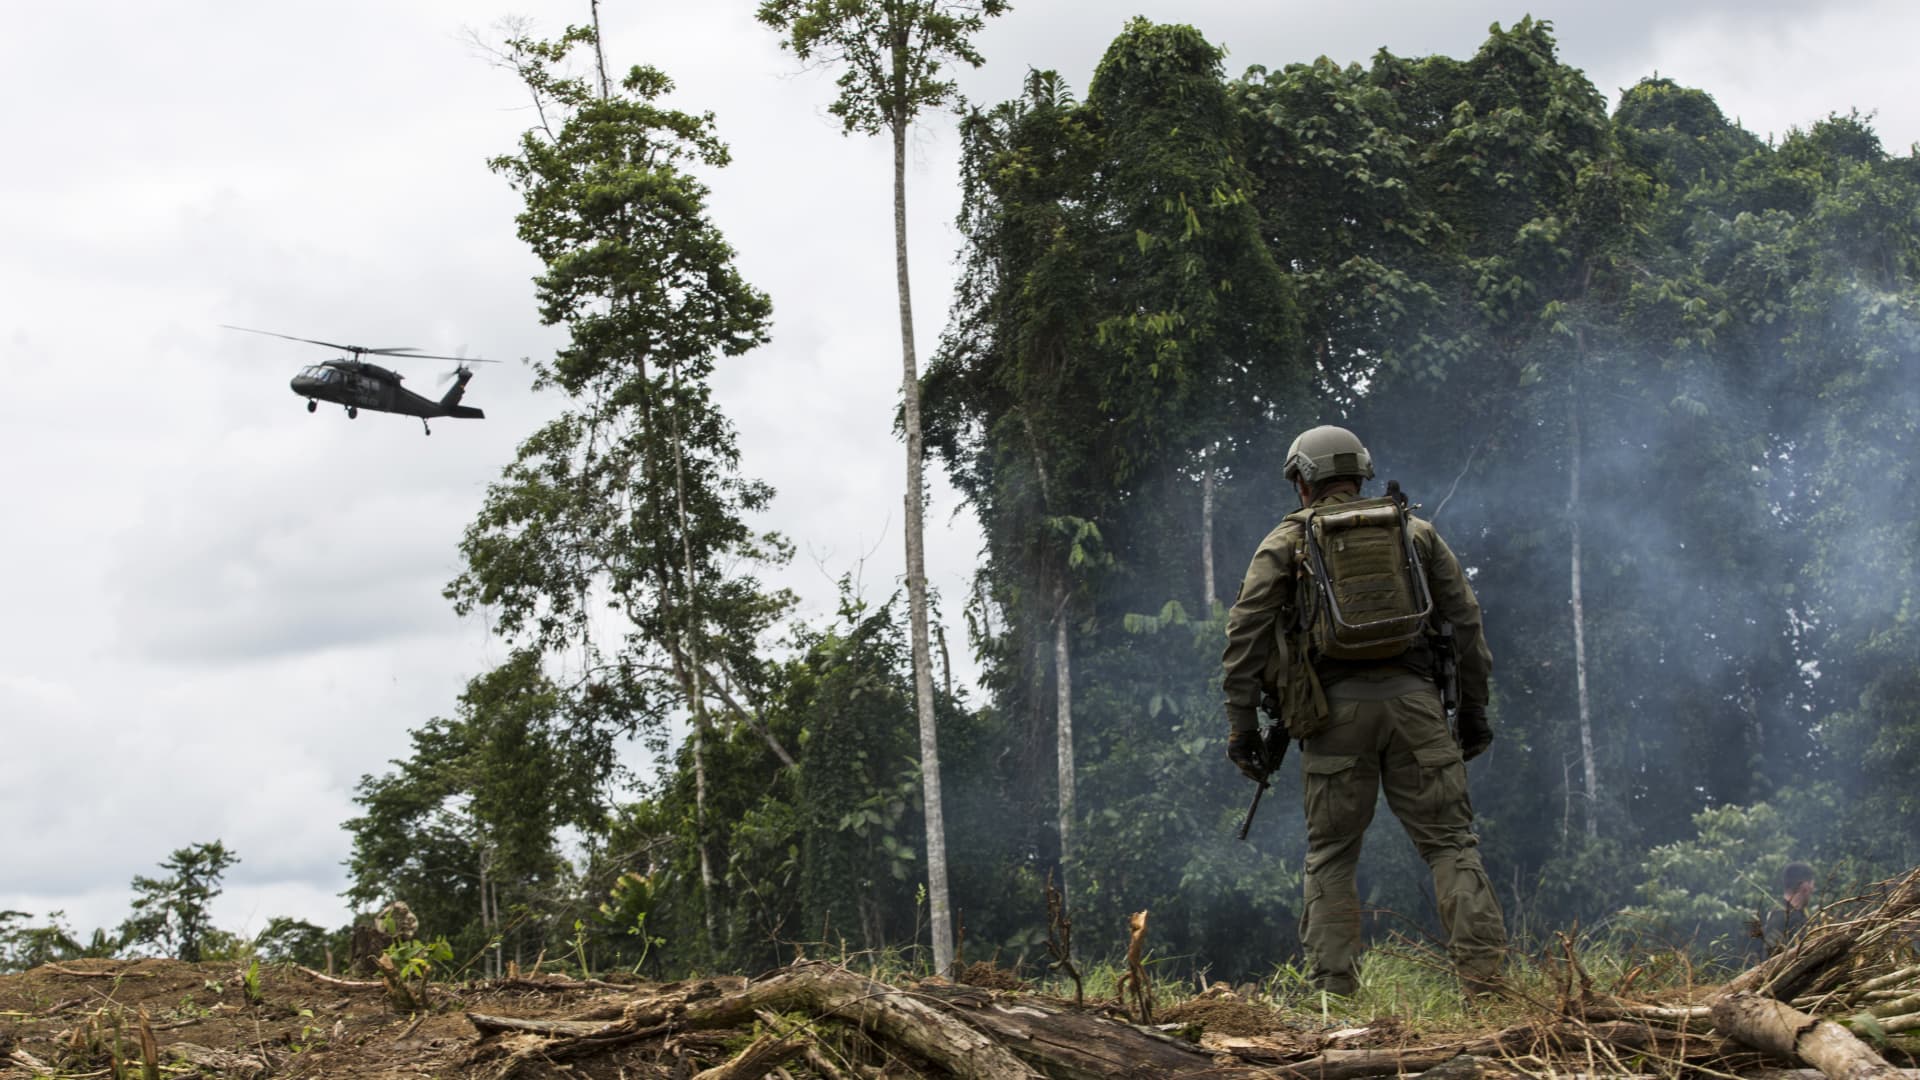 An anti-narcotics police officer stands as a police helicopter flies over a coca field during an operation in Tumaco, Narino department, Colombia, on Tuesday, May 8, 2019.